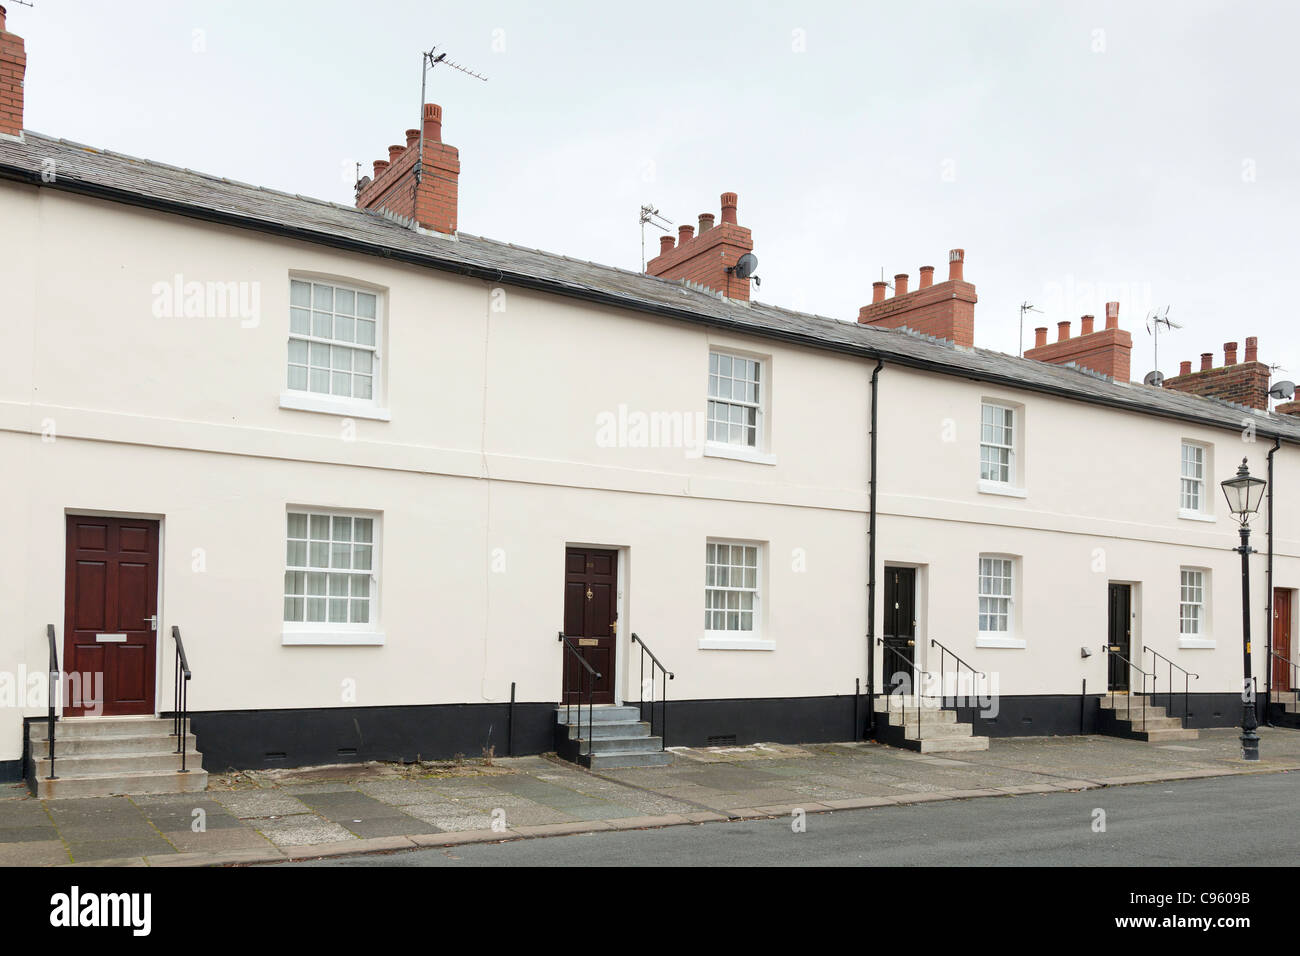 Mount street terraced housing in the fishing port of Fleetwood. Stock Photo